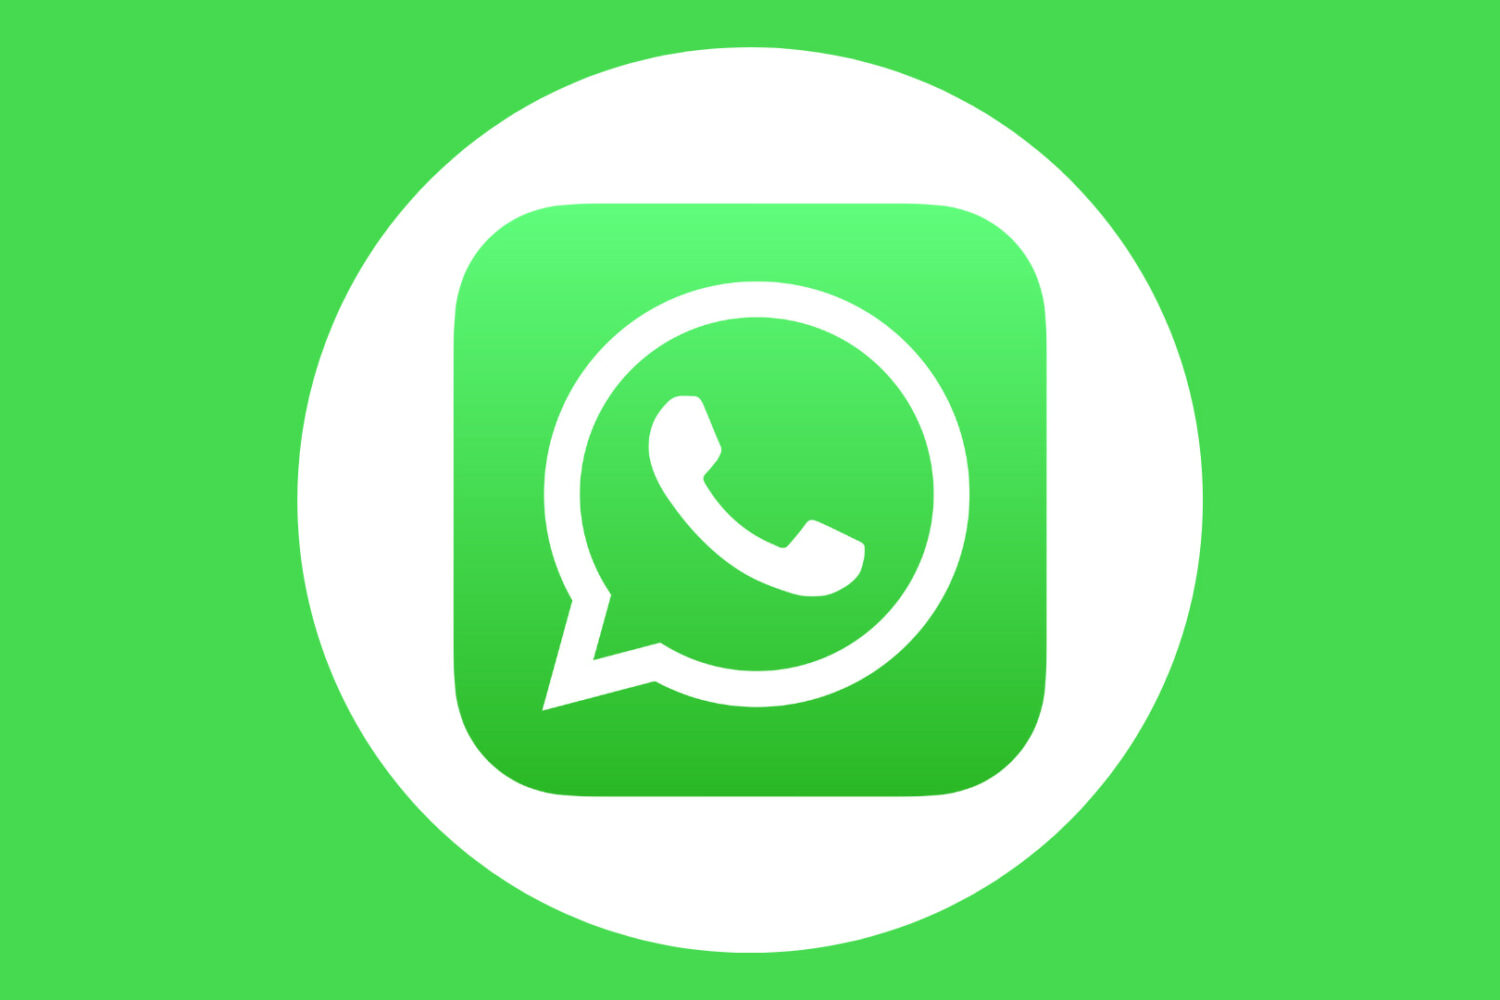 The icon of the WhatsApp mobile app inside a solid white circle, set against an all-green background